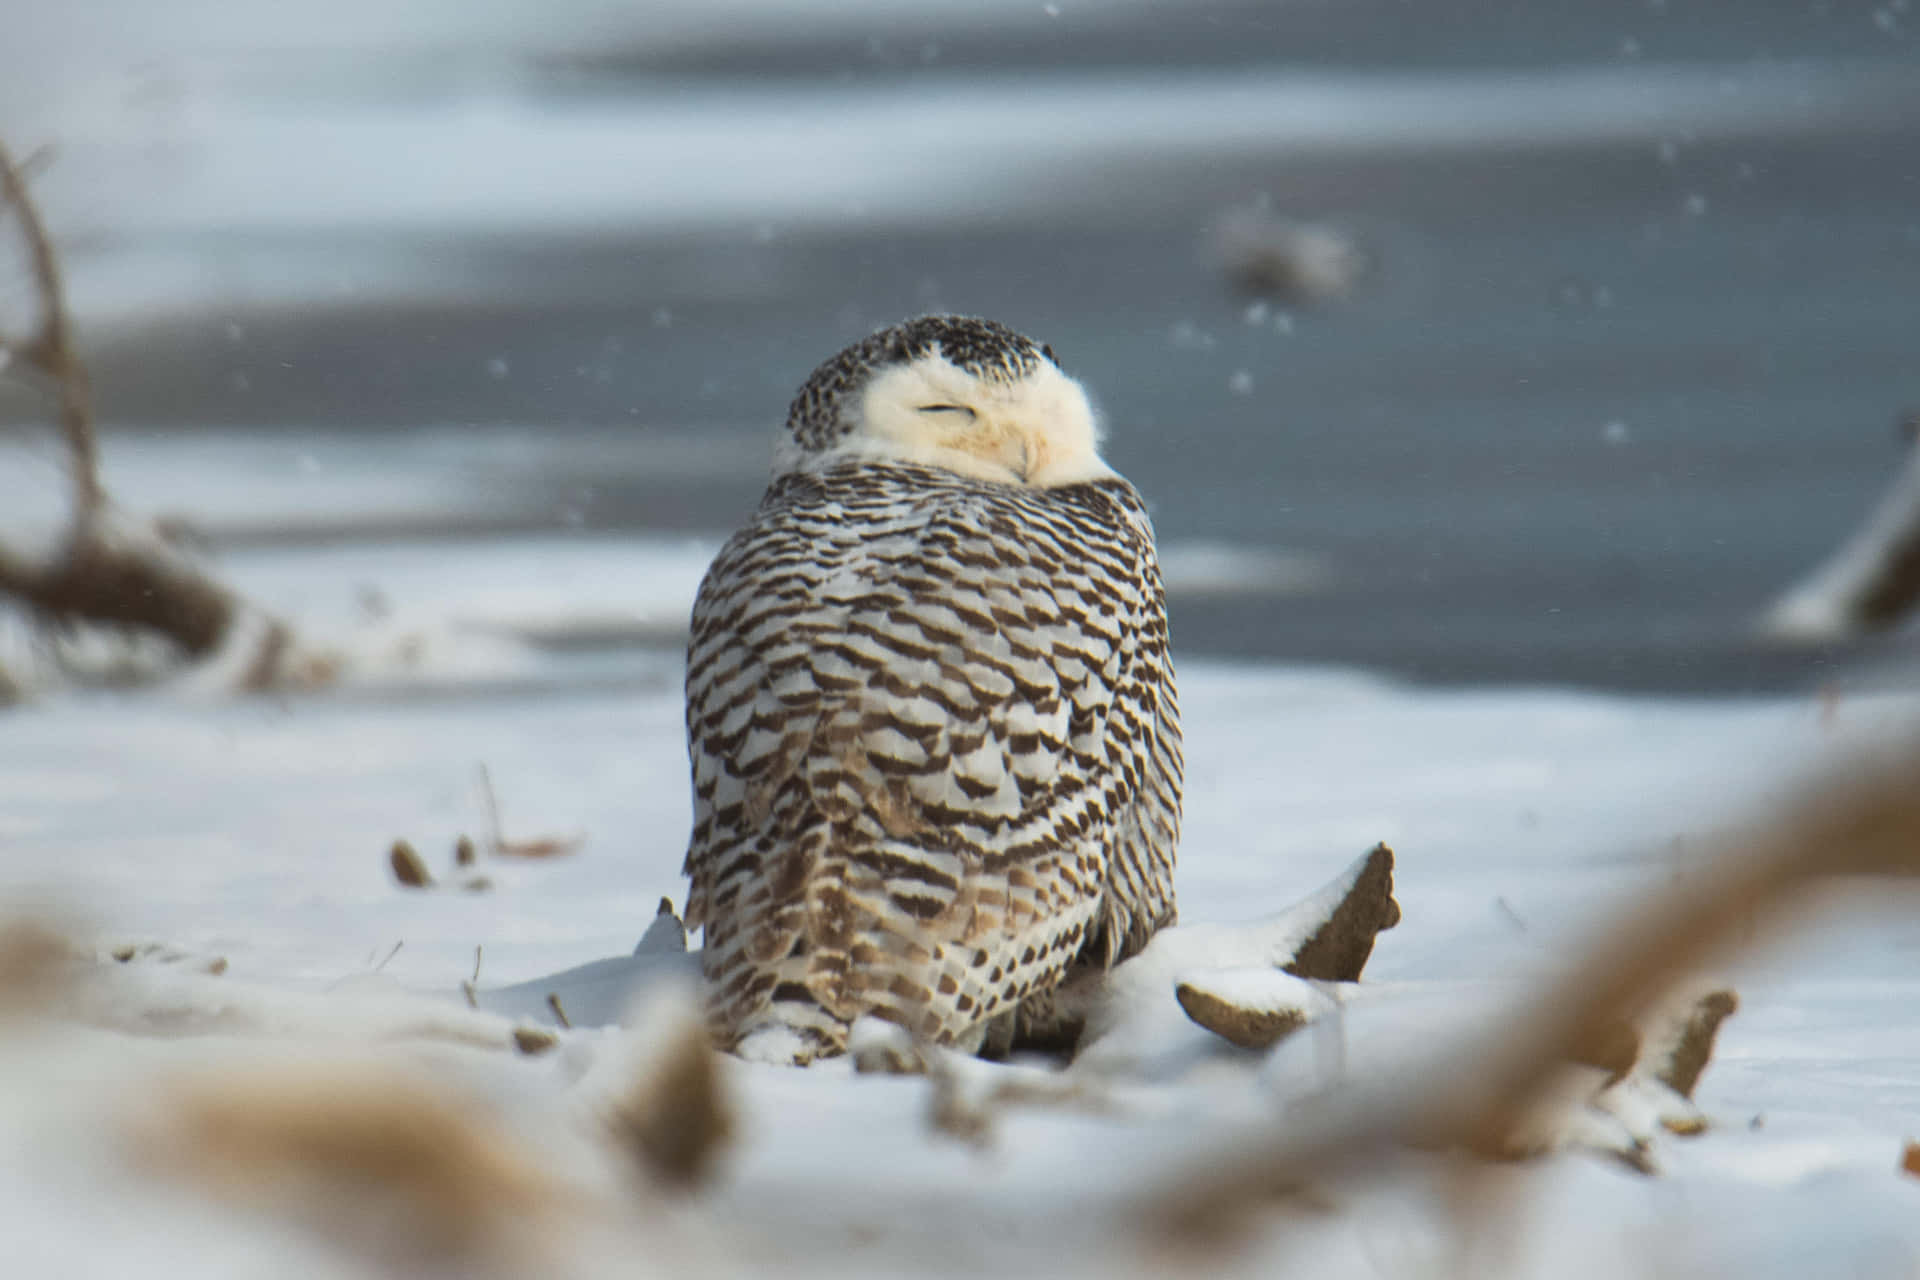 "Admiring the majestic beauty of a Snowy Owl in its natural habitat "